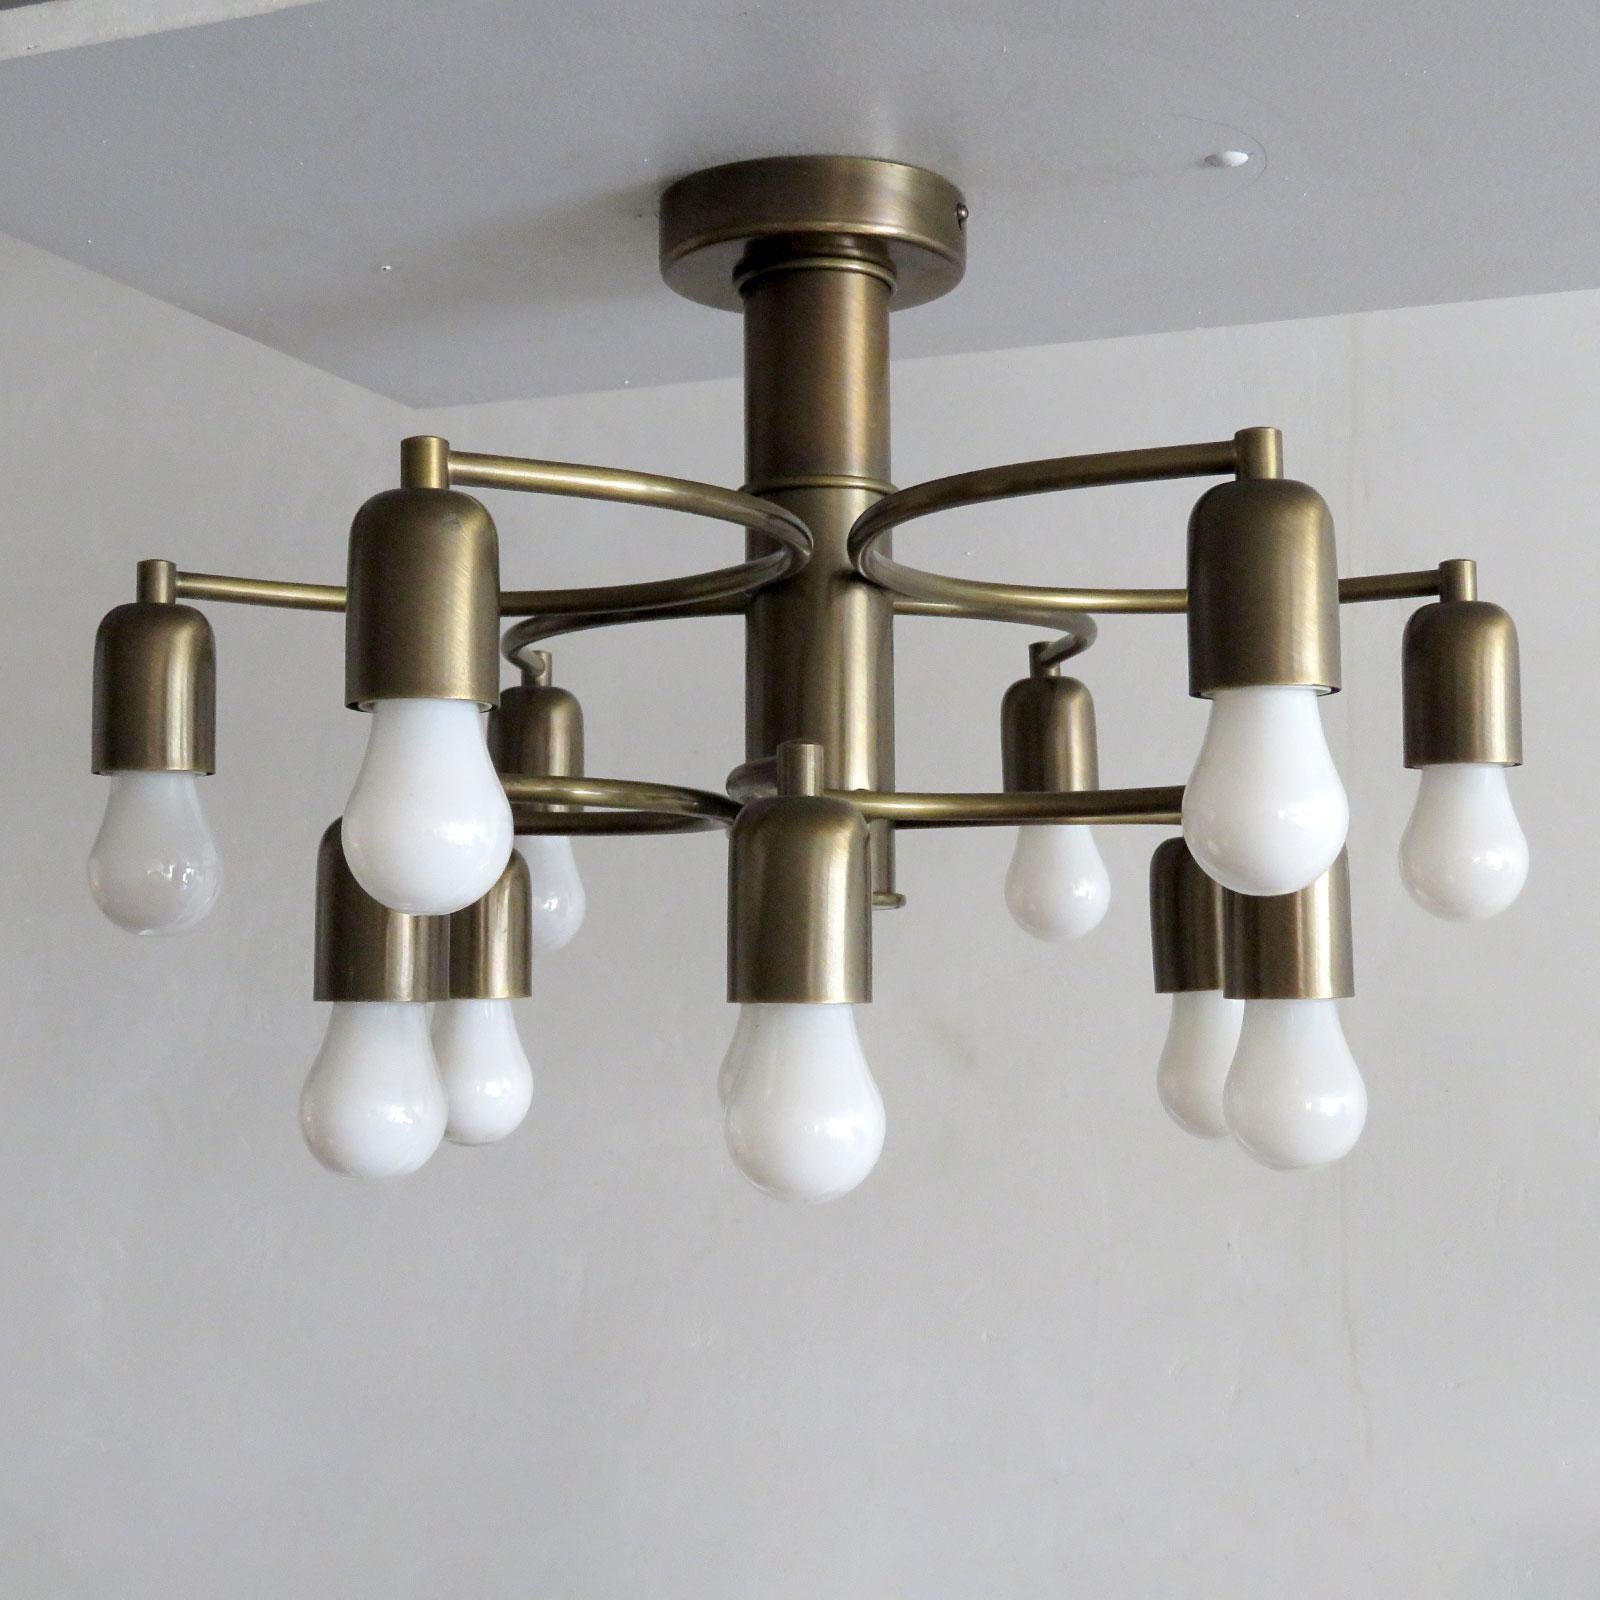 Stunning brushed bronze twelve-light flush mount ceiling light by Honsel, Germany with two tiers of semi circular arms, can be used as wall sconce as well, wired for US standards, twelve E27 sockets, max. wattage 25w each or LED equivalent, bulbs